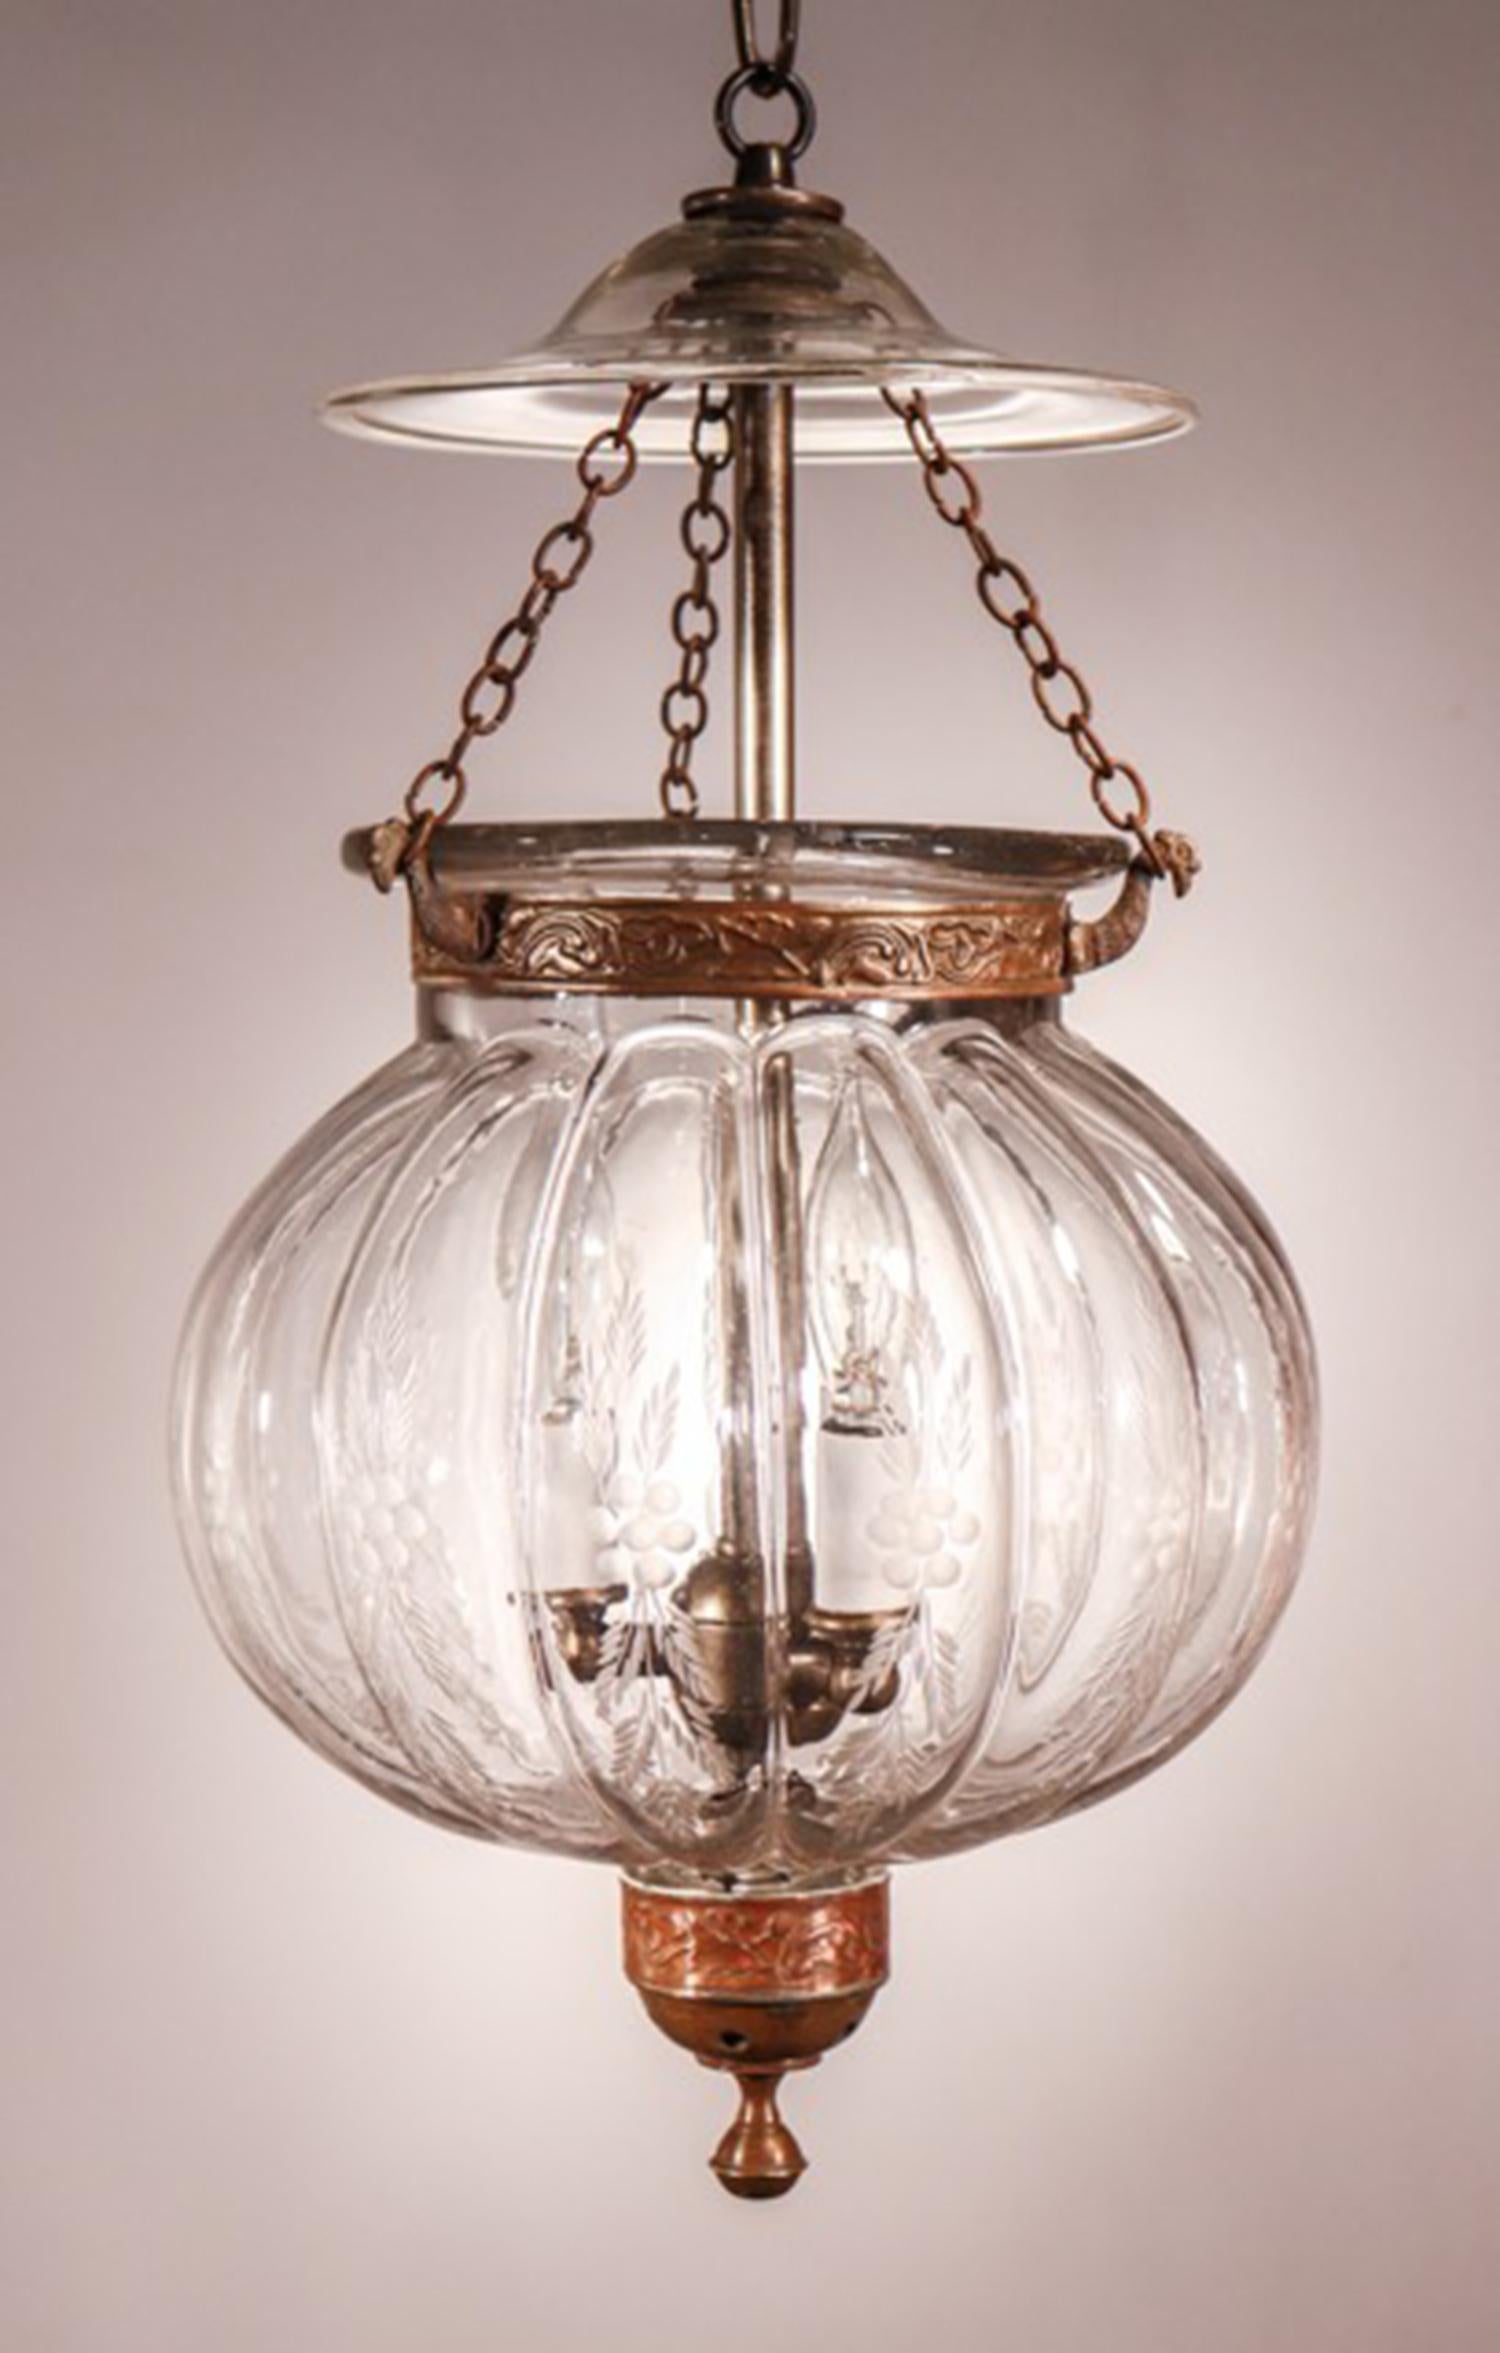 An antique Belgian melon or pumpkin-shaped bell jar lantern with an etched wheat motif, circa 1900. This authentic lantern features excellent quality hand blown glass and an ornamental brass band and finial/candle holder base. The fixture has been